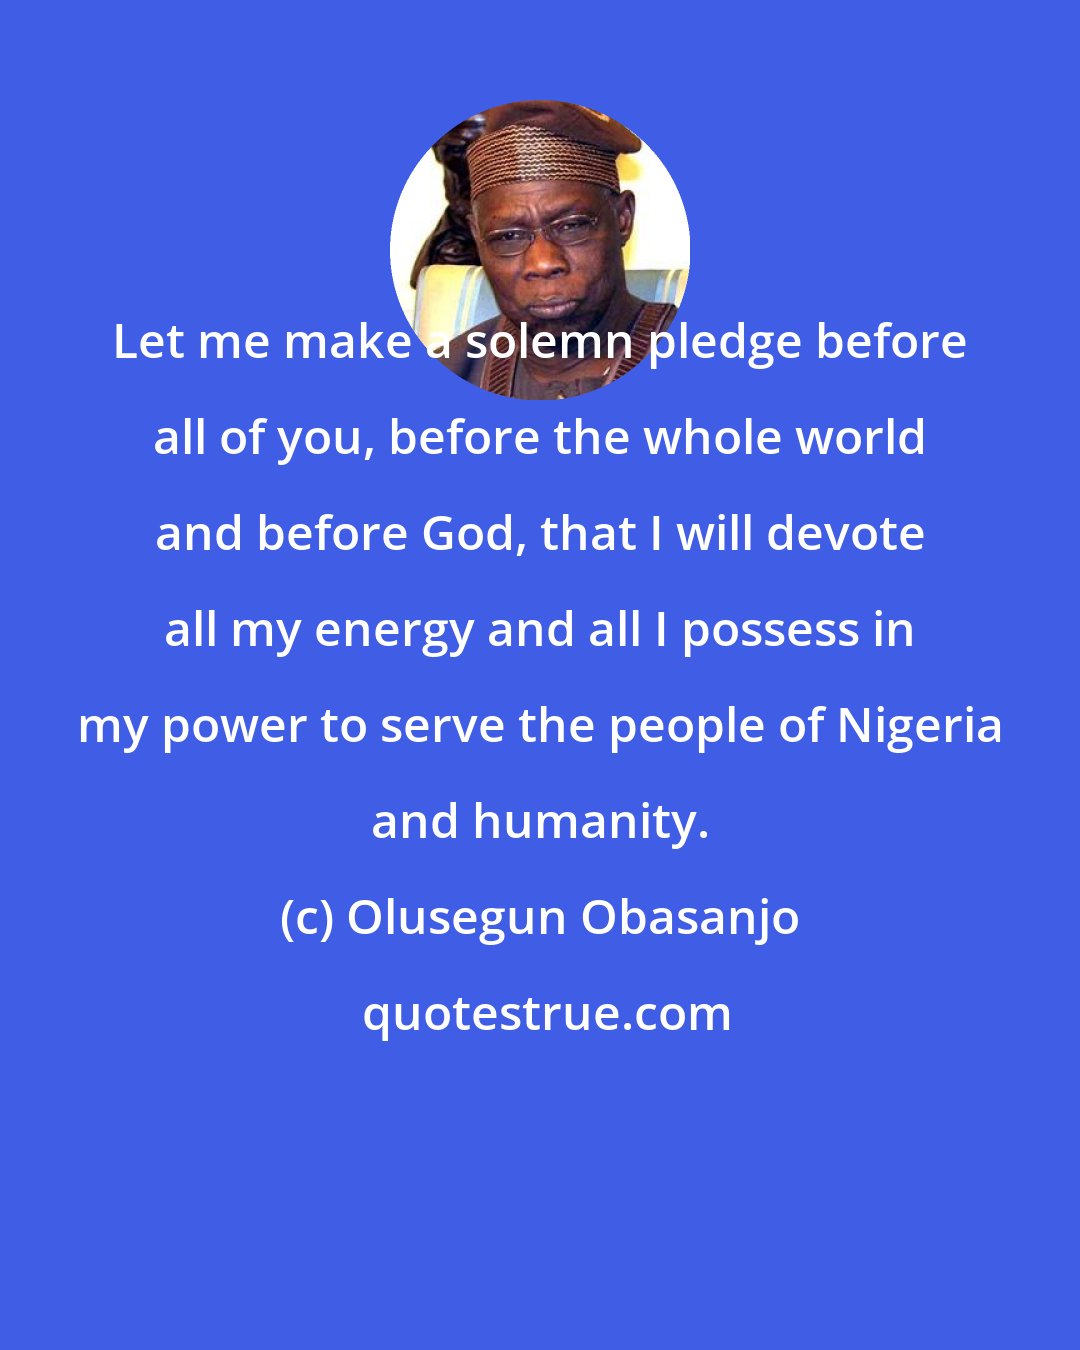 Olusegun Obasanjo: Let me make a solemn pledge before all of you, before the whole world and before God, that I will devote all my energy and all I possess in my power to serve the people of Nigeria and humanity.